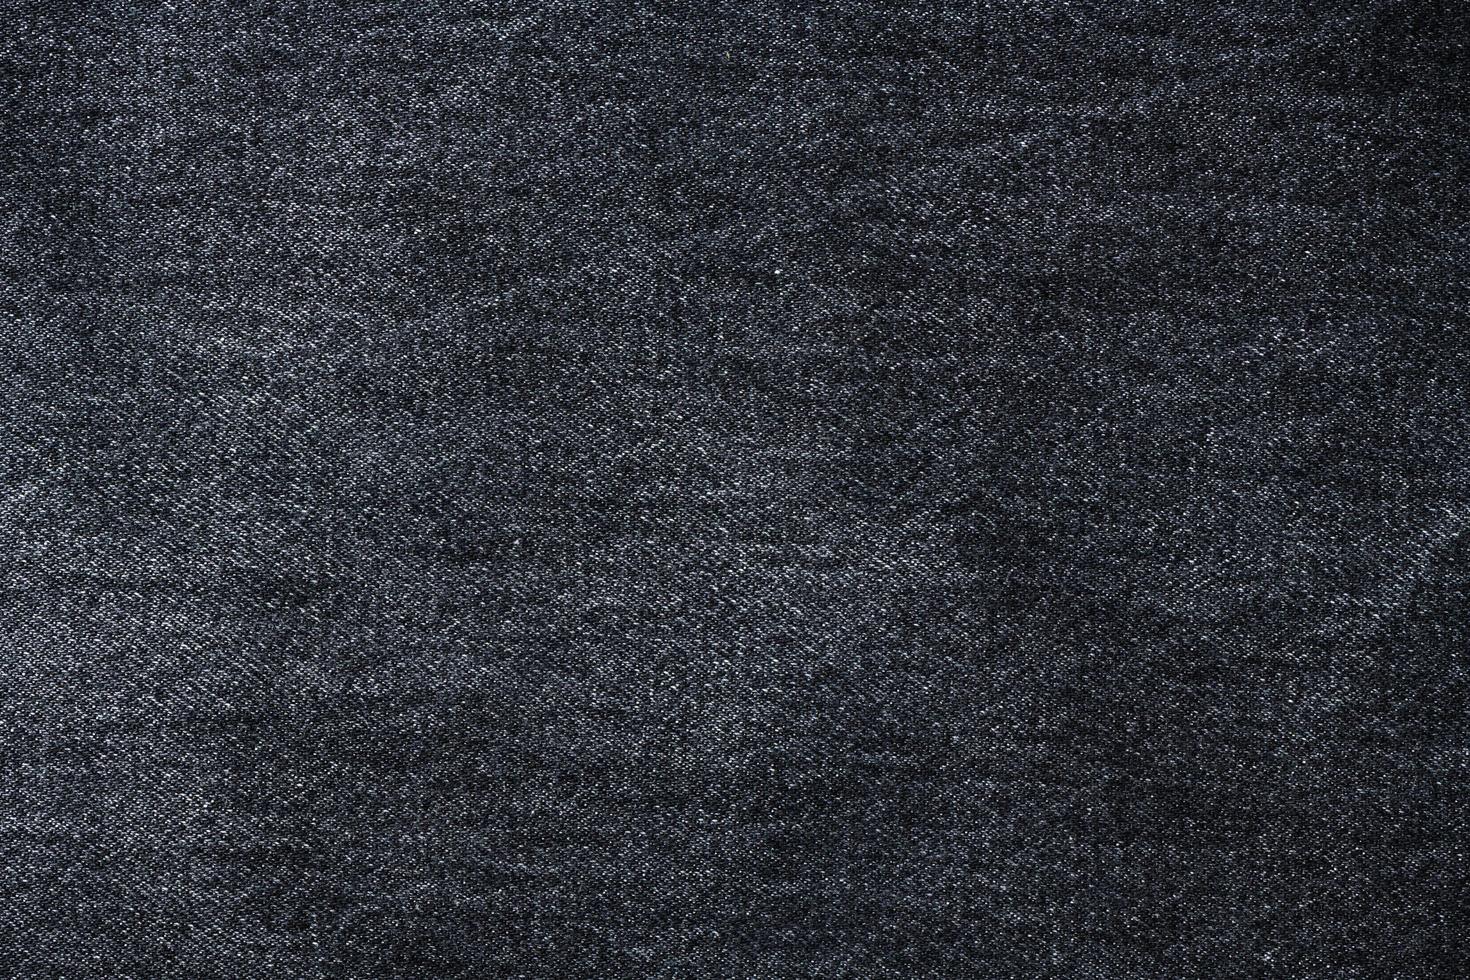 Old black jeans fabric background texture. photo